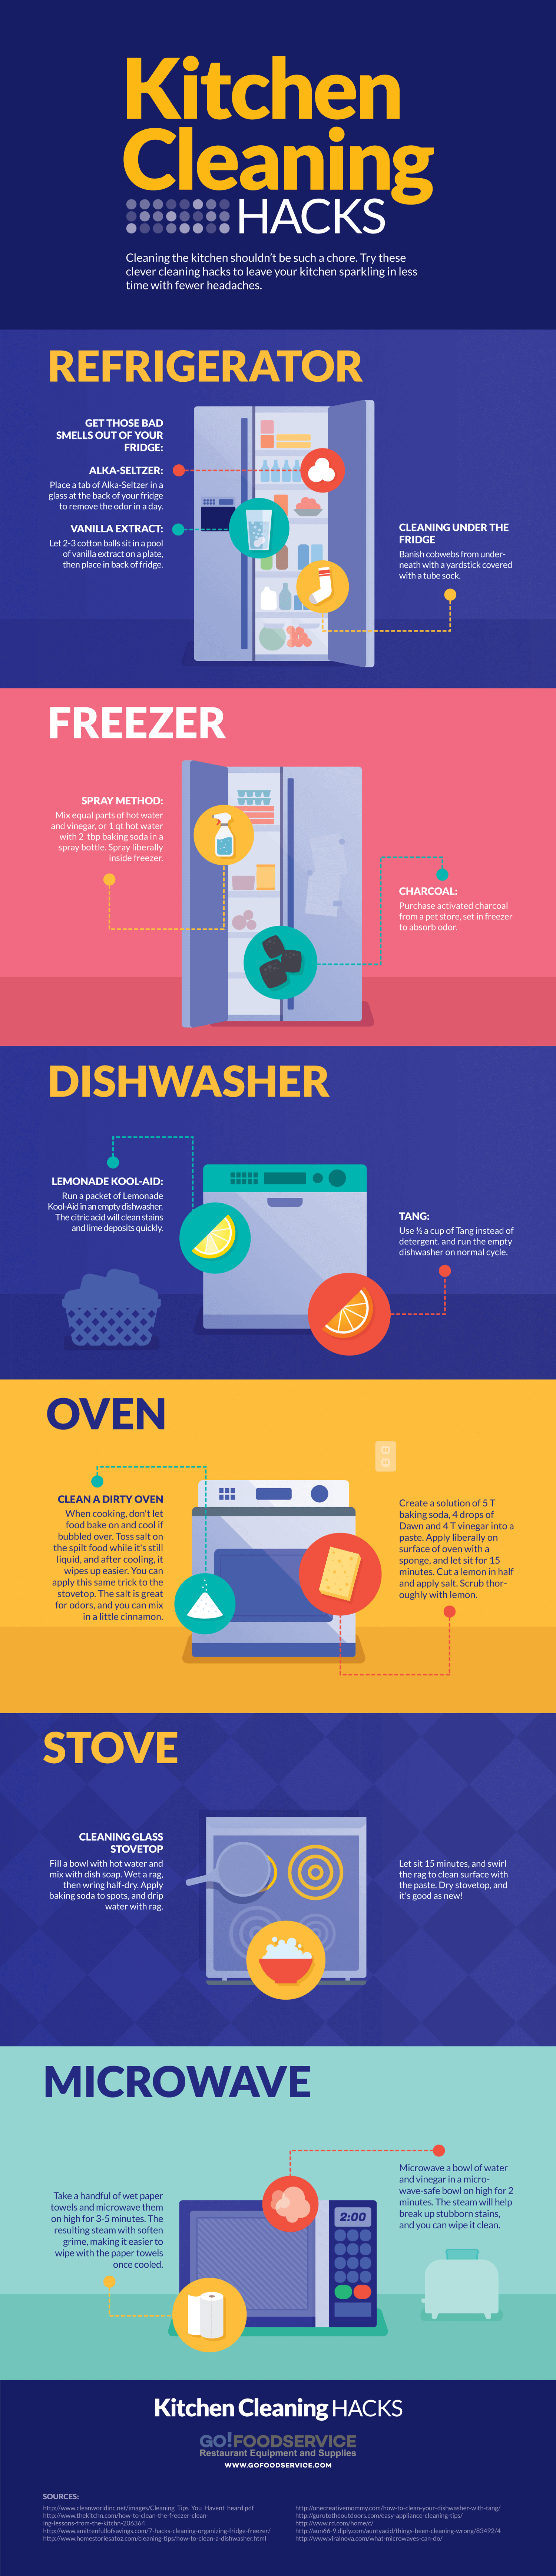 Kitchen Cleaning Hacks Infographic